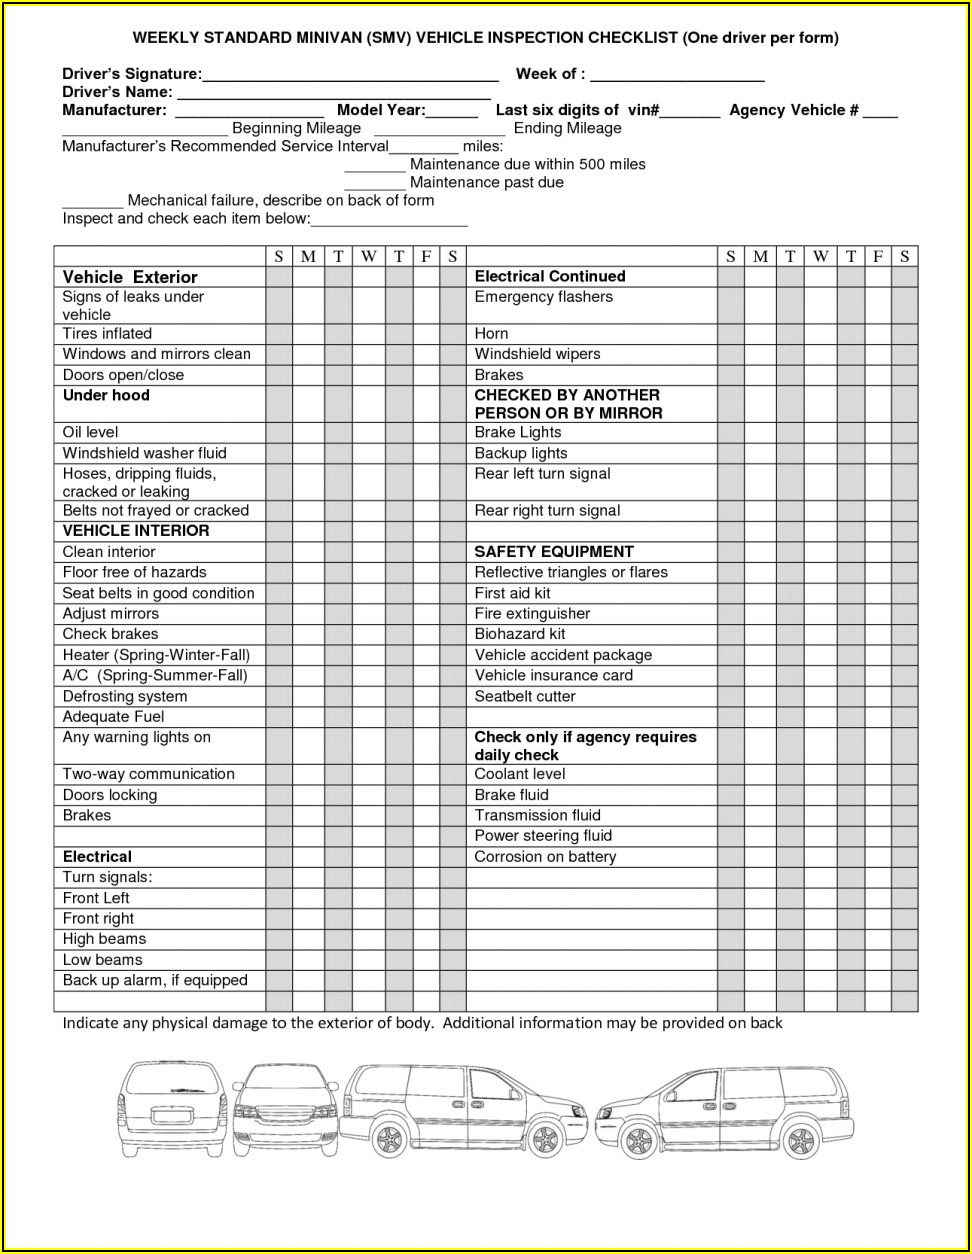 Free Vehicle Inspection Report Form